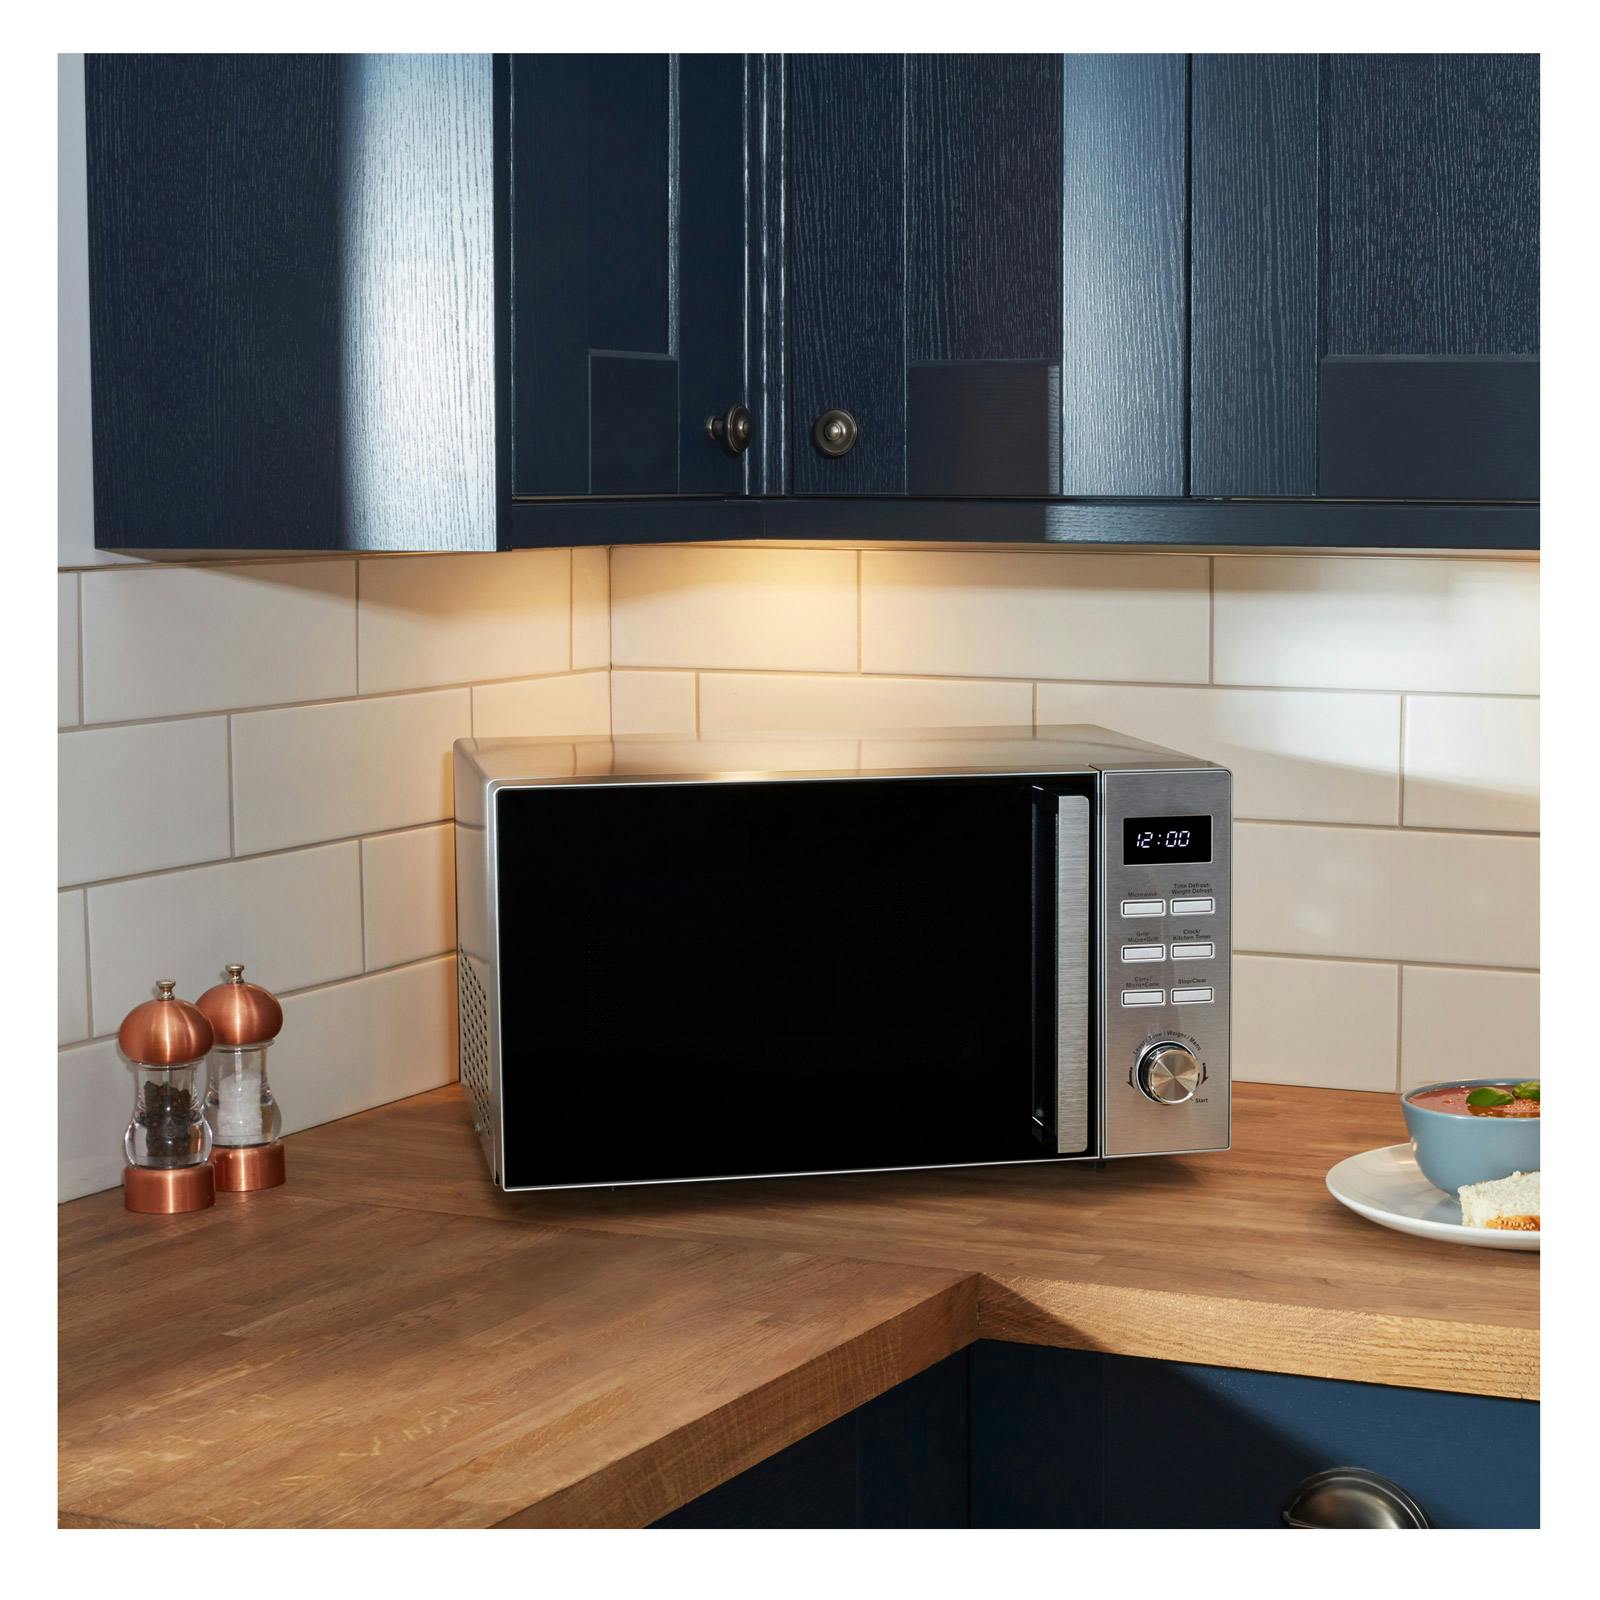 Beko MCF25210X Combination Microwave Oven - 25L 900W